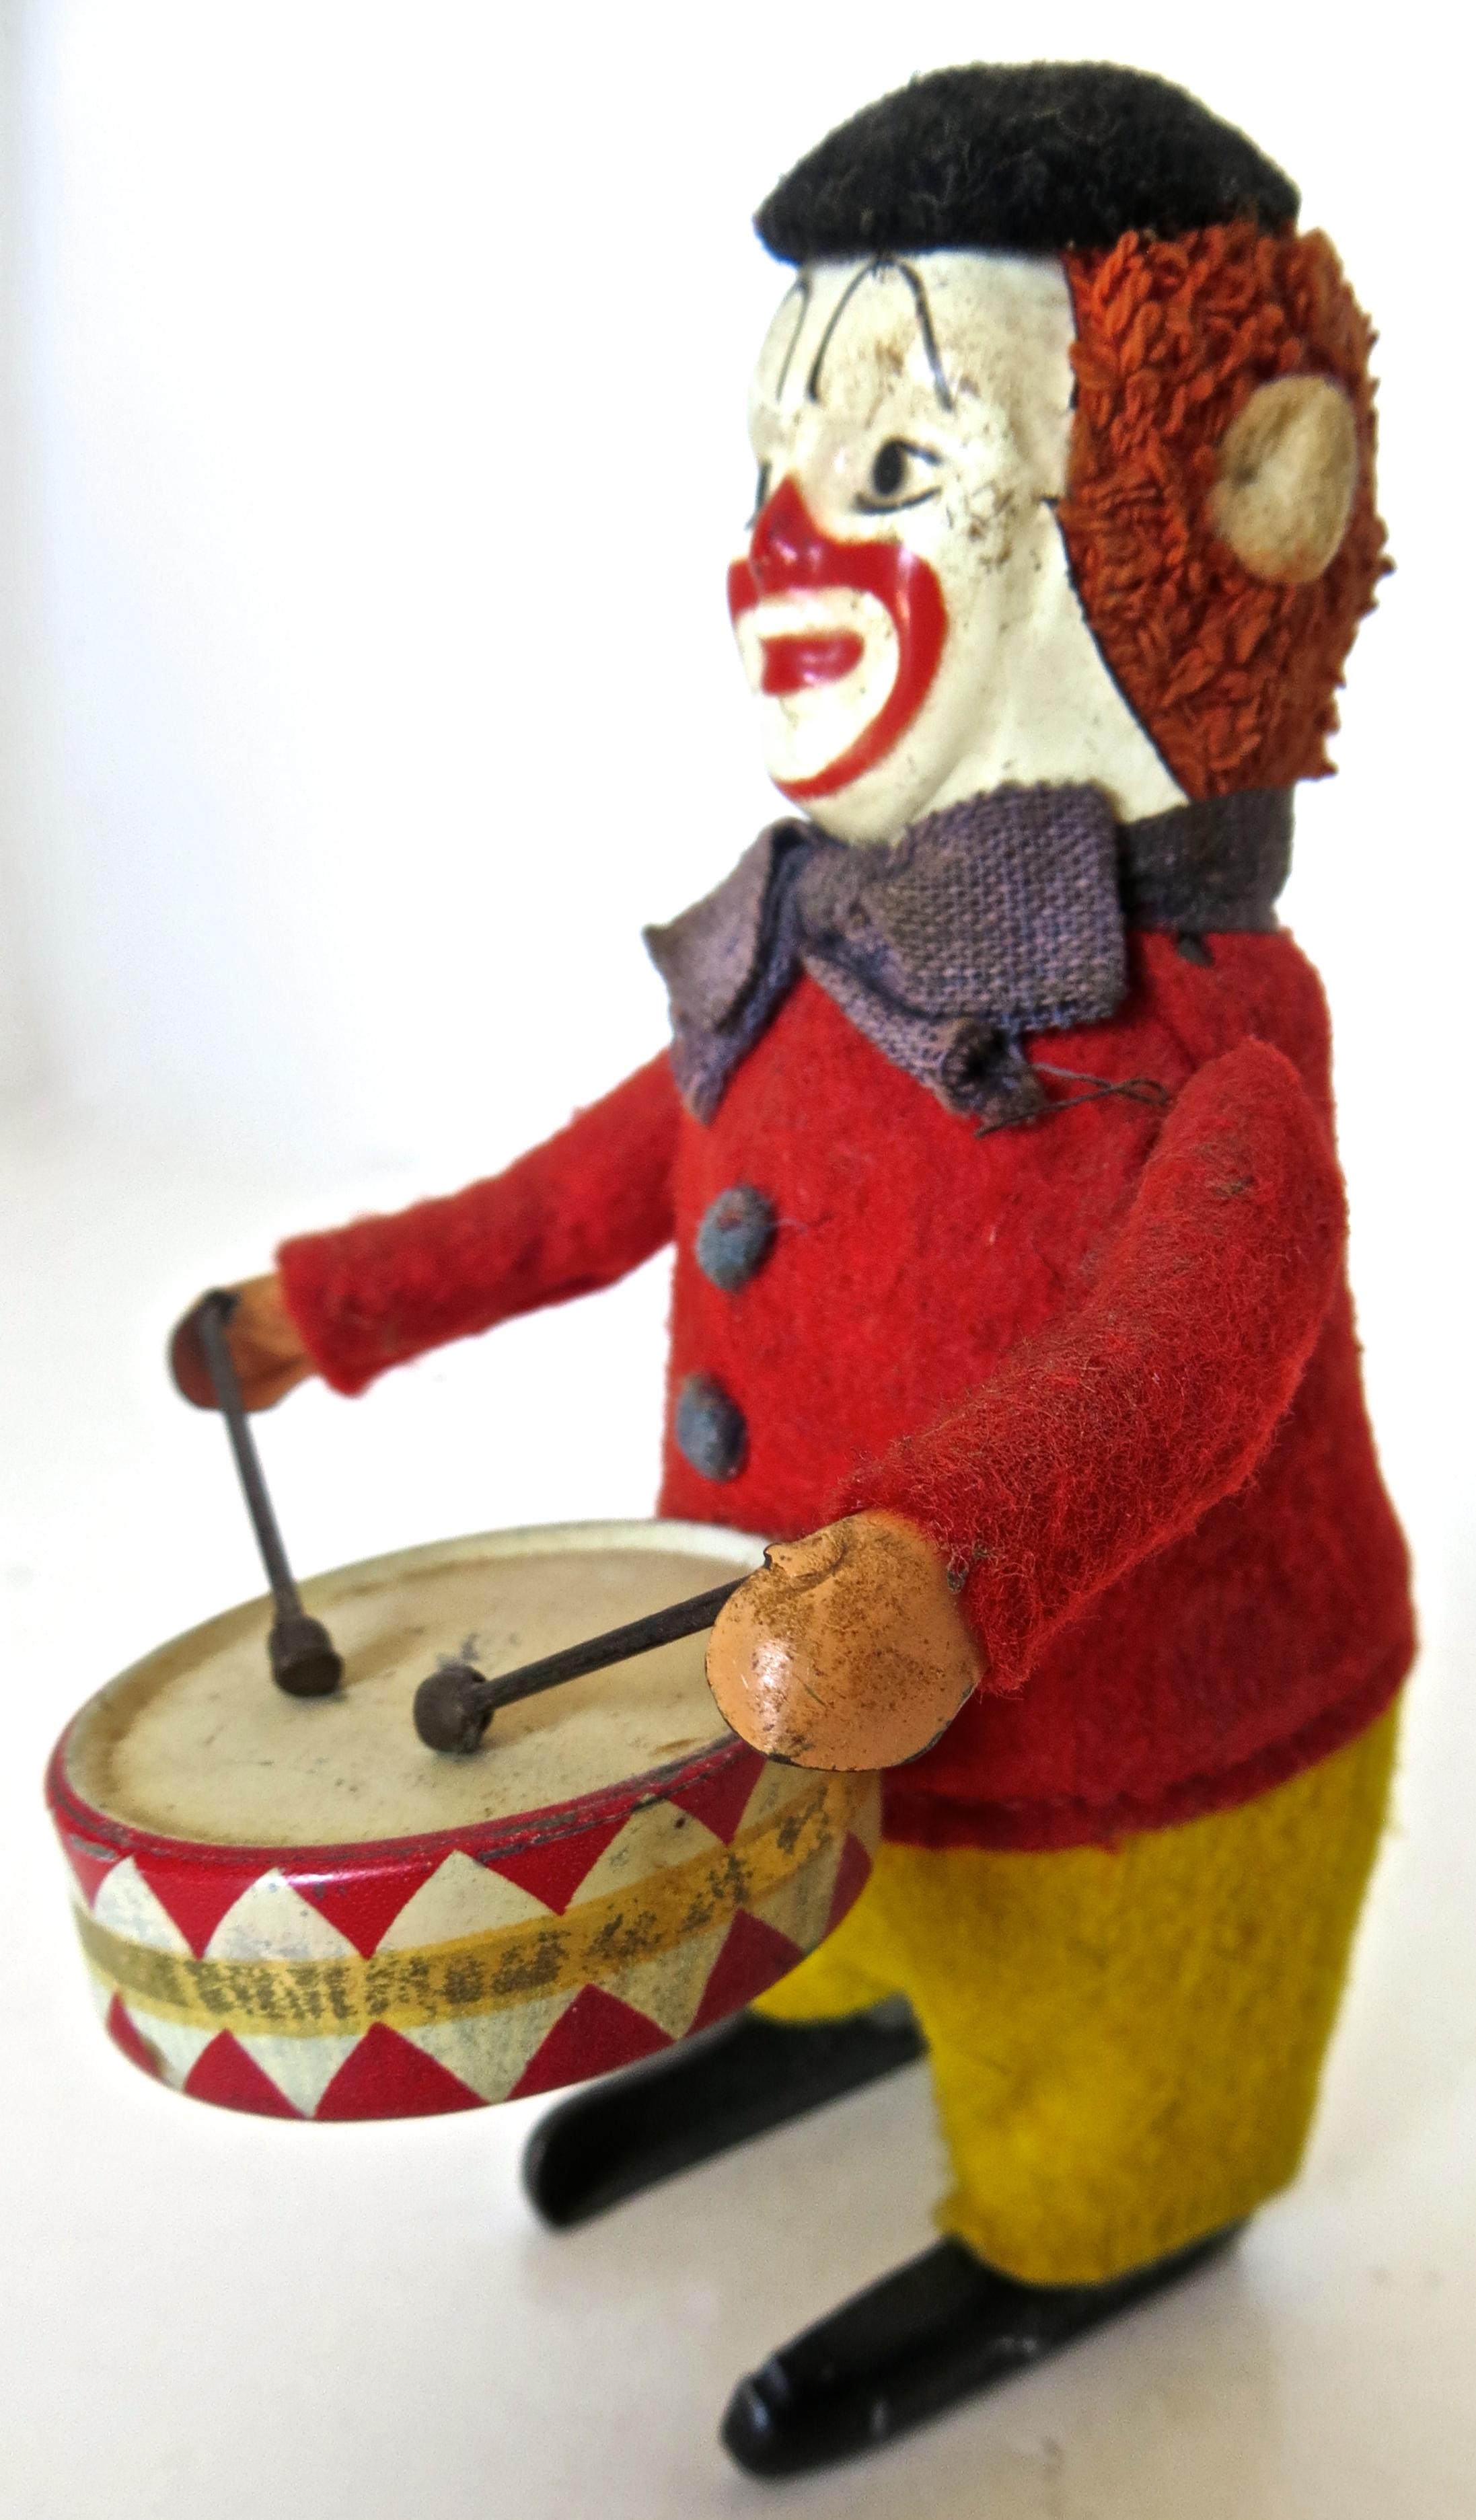 When wound up this charming German Schuco toy clown dances around, while raising his arms up and down playing the drum. In excellent all original condition, he has a tin face and drum, and in dressed in a red felt vest with yellow trousers, and a